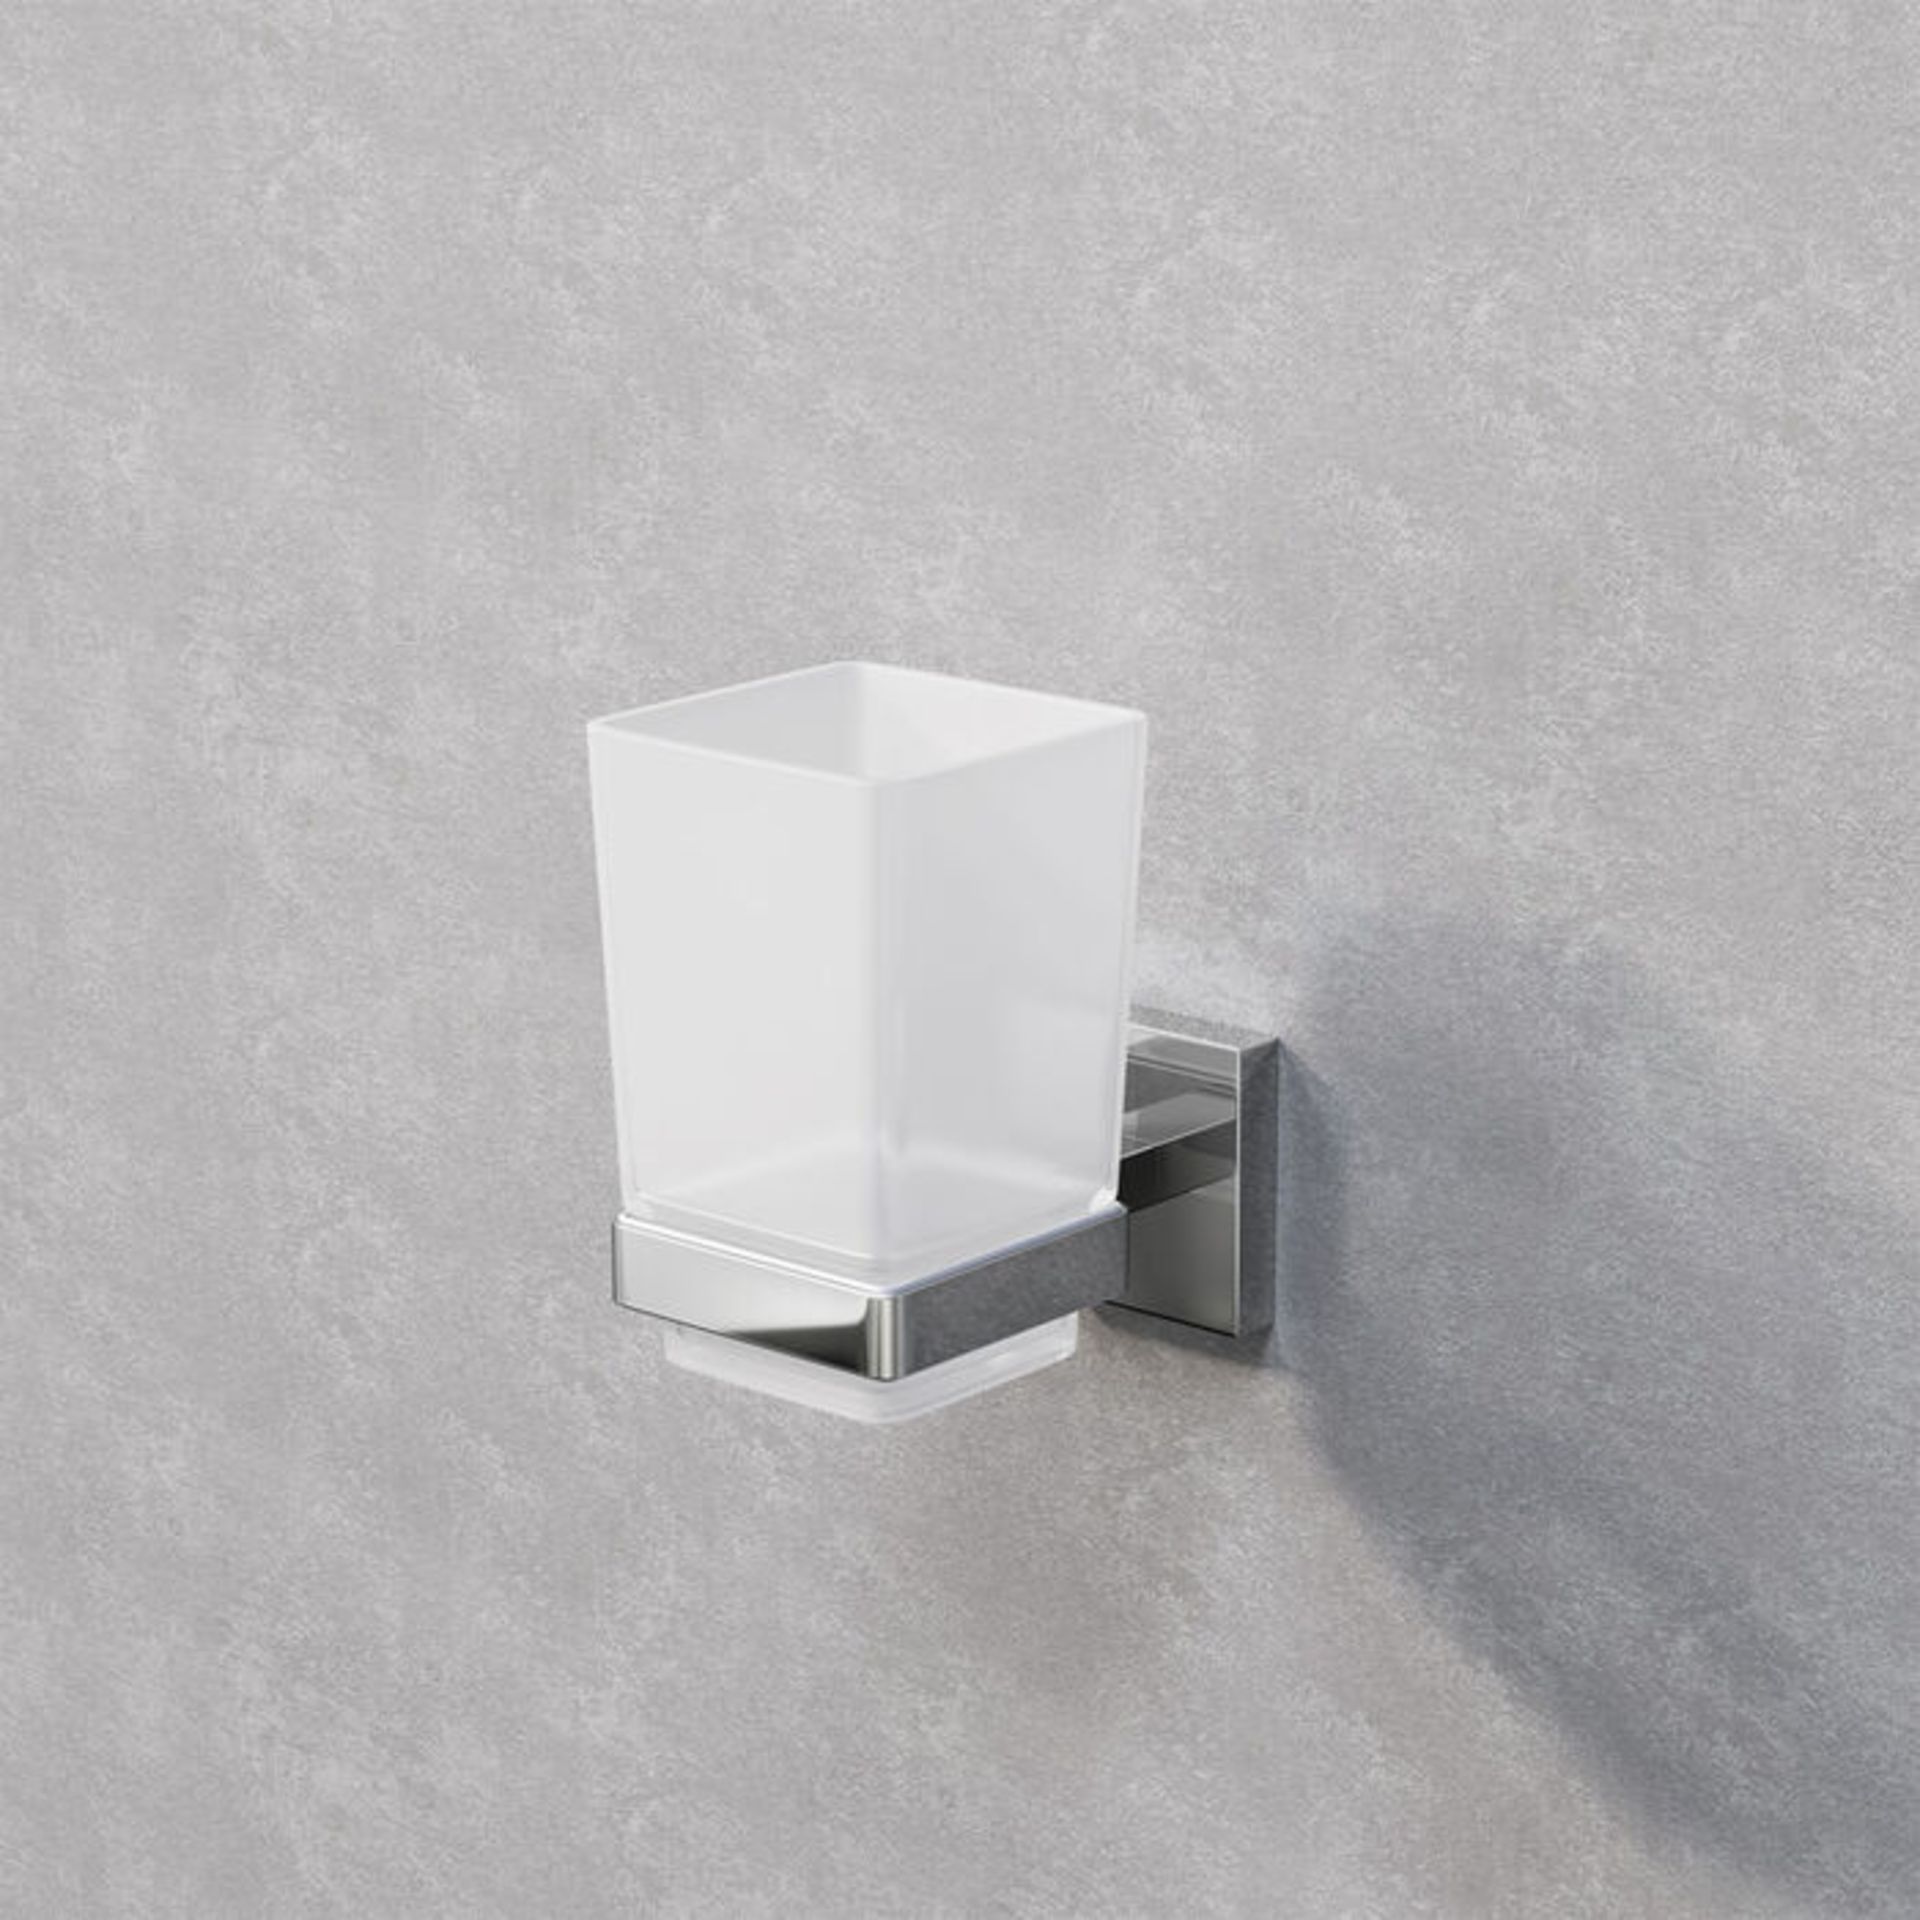 (PP1016) Jesmond Tumbler Holder Finishes your bathroom with a little extra functionality and s... - Image 2 of 2